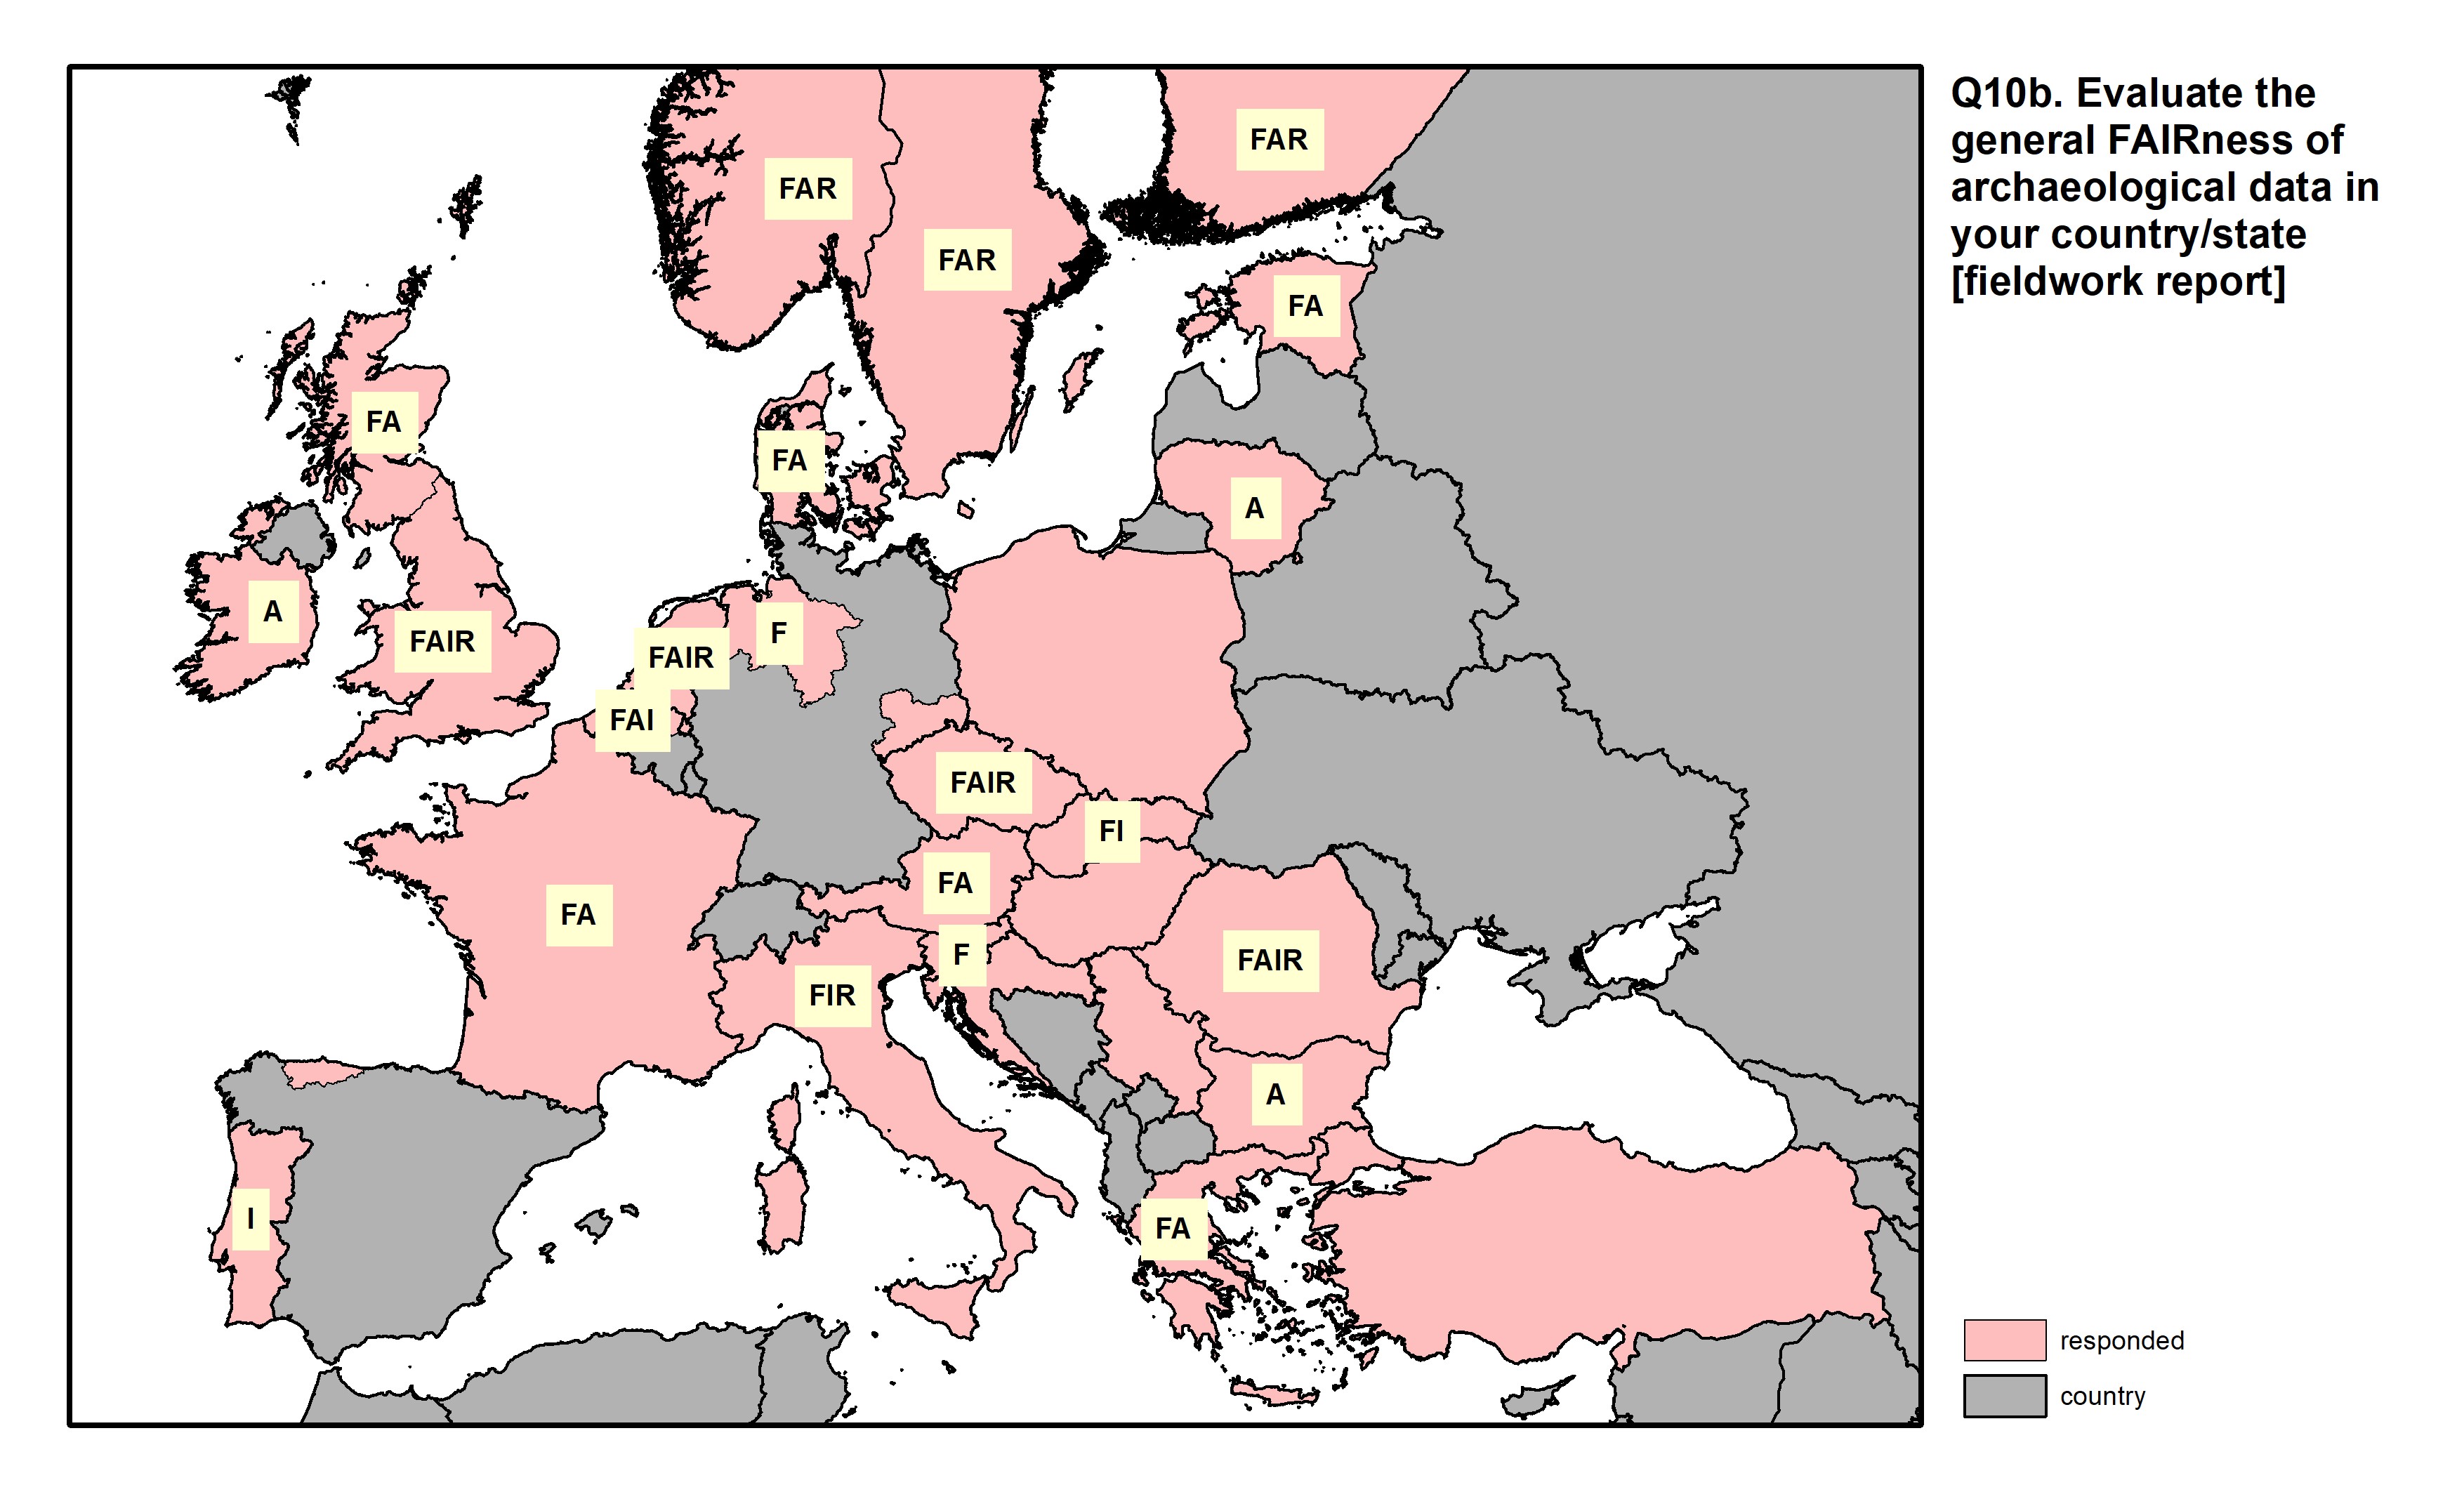 Figure 35: a map of Europe showing countries and regions in colour based on response rates to the survey question.